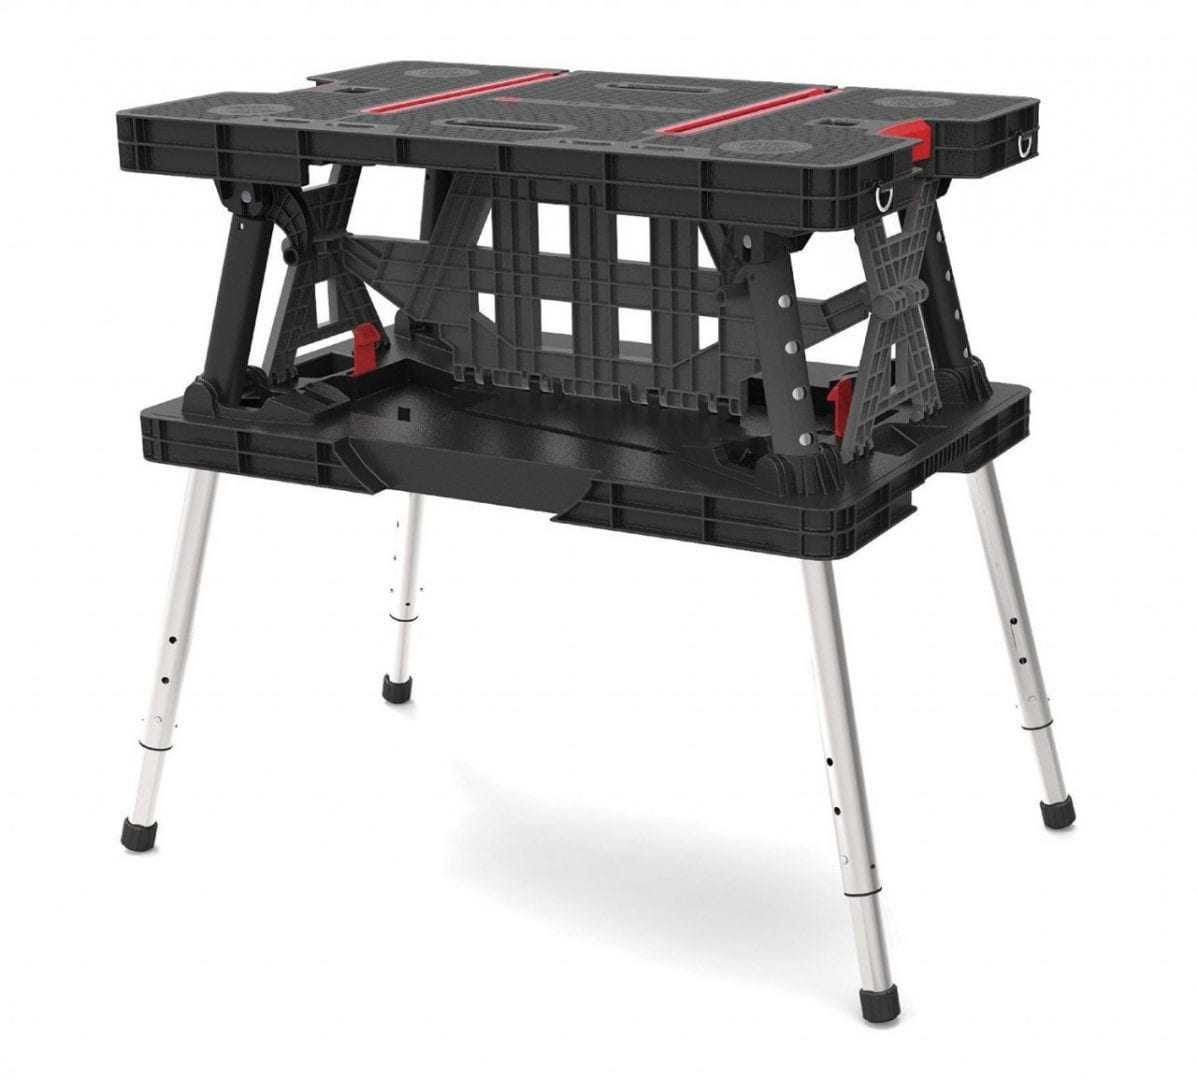 Keter adjustable Folding Compact Table Work Station Solution6